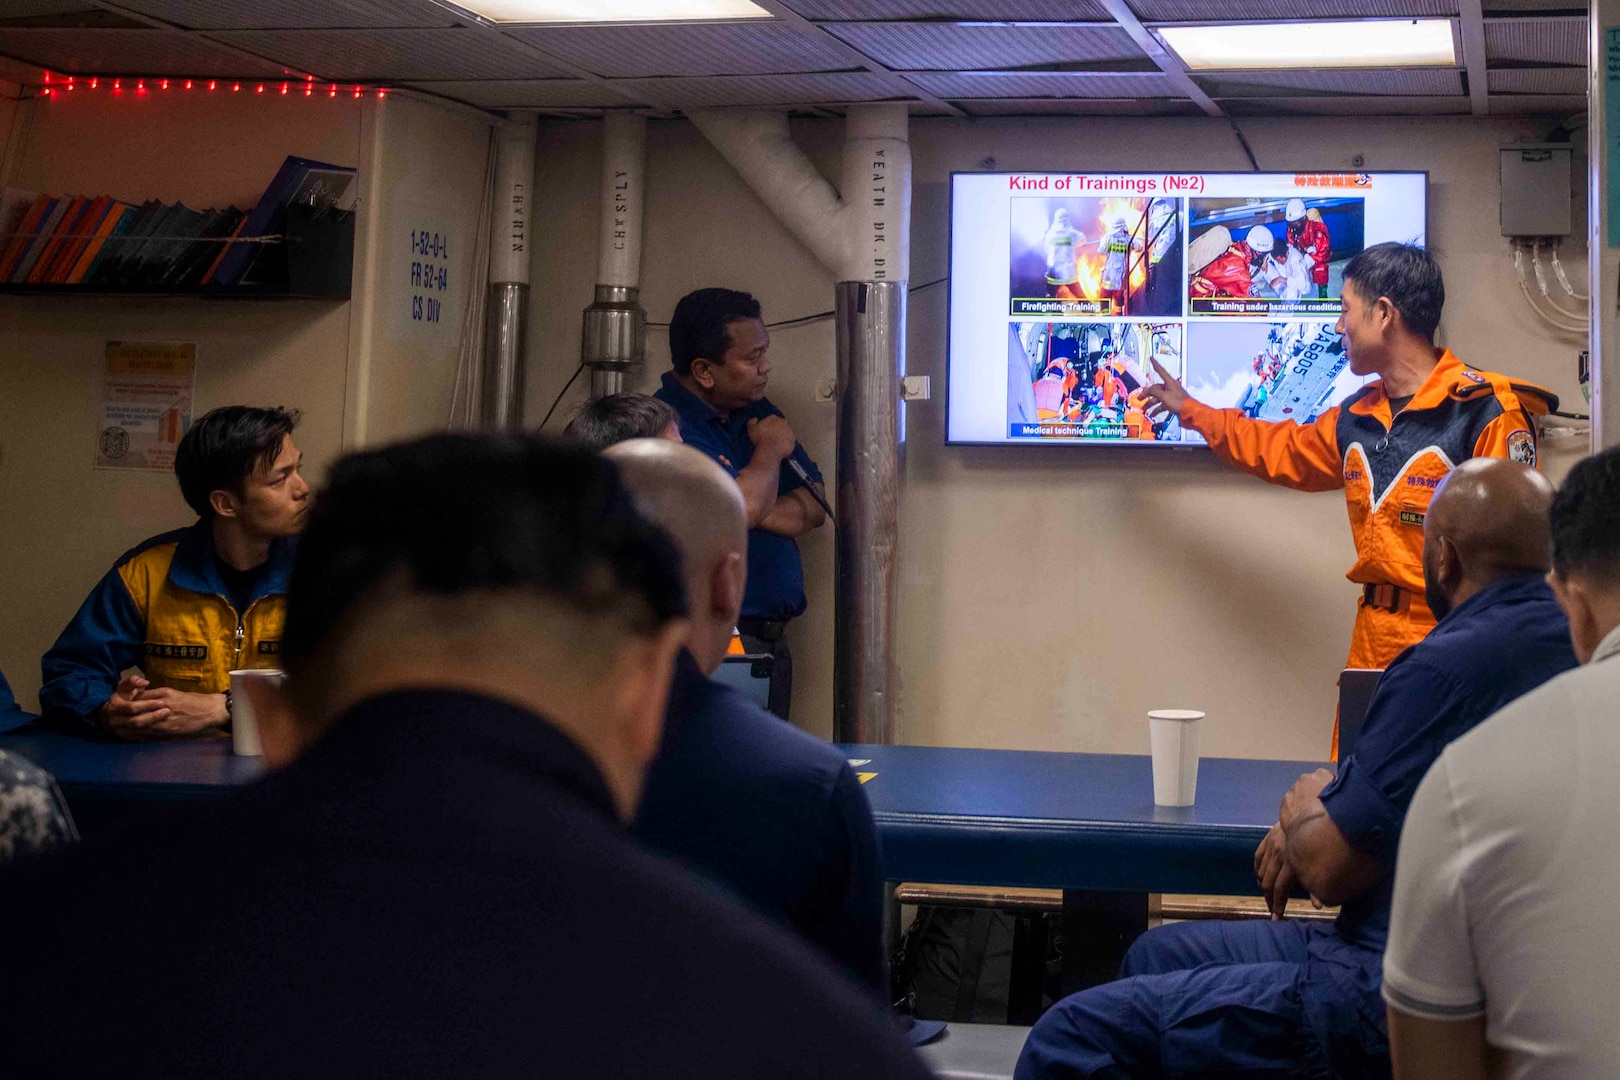 Members of the Japanese Coast Guard give training to members of the Republic of Singapore Navy, members of the Singapore Police Coast Guard, members of the Malaysia Maritime Enforcement Agency, and Sailors onboard U.S. Coast Guard Cutter Bertholf (WMSL 750), March 3. Bertholf was in Malaysia for a multiple day engagement to engage in professional subject matter exchanges with regional partners and allies and will patrol and operate as directed during their Western Pacific deployment. (U.S. Navy photo taken by Mass Communication Specialist 3rd Class Charlotte Duran)